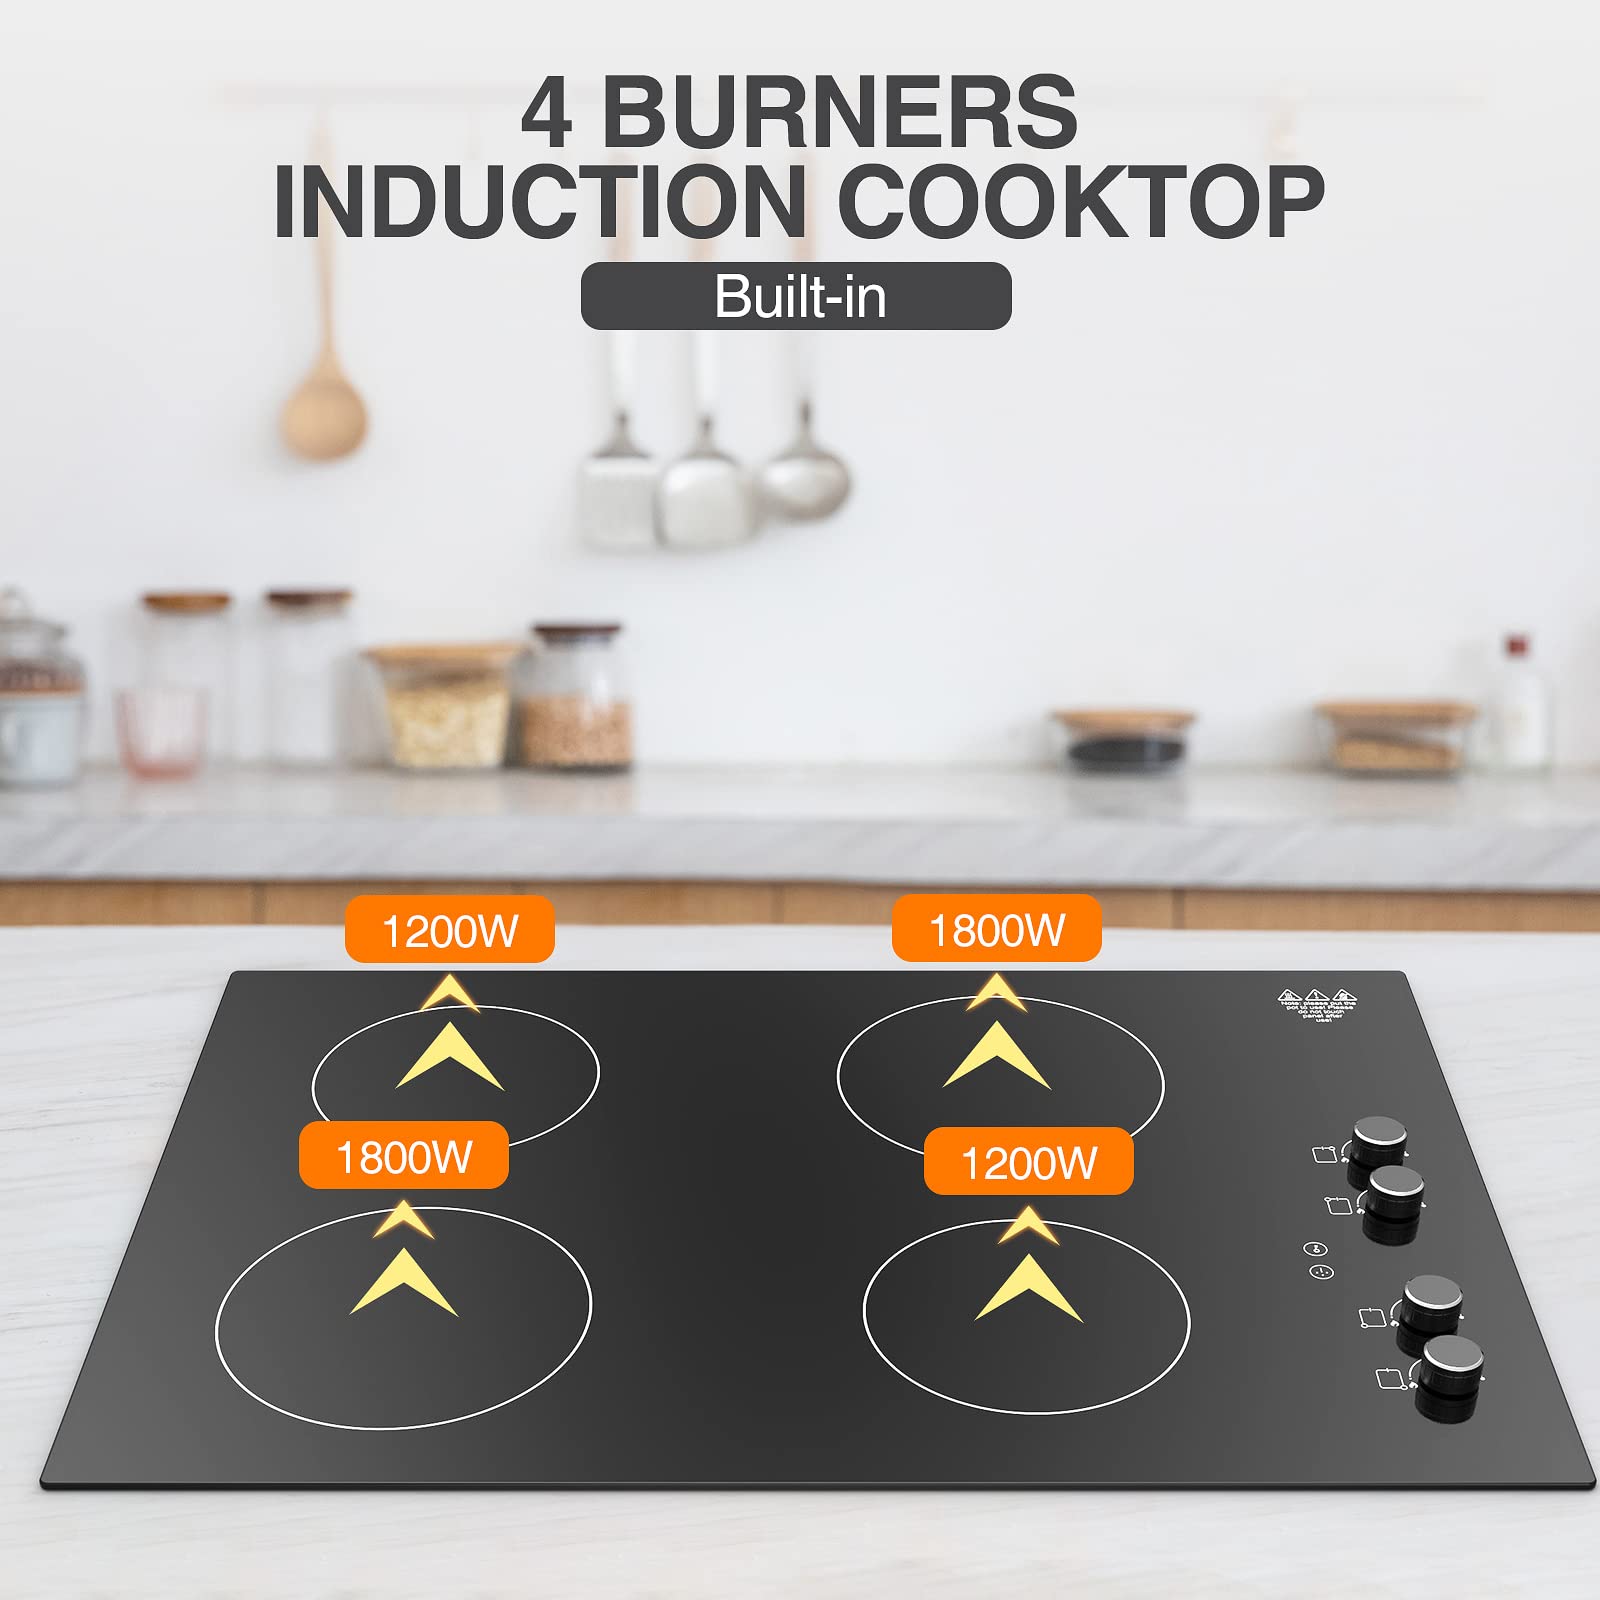 Induction Cooktop 30 Inch, 6000W Electric Stove Top 4 Burners Induction Burner Countertop and Built-in POTFYA,220v-240v Knob Control,Ceramic Glass Surface, Suitable for Magnetic Pans